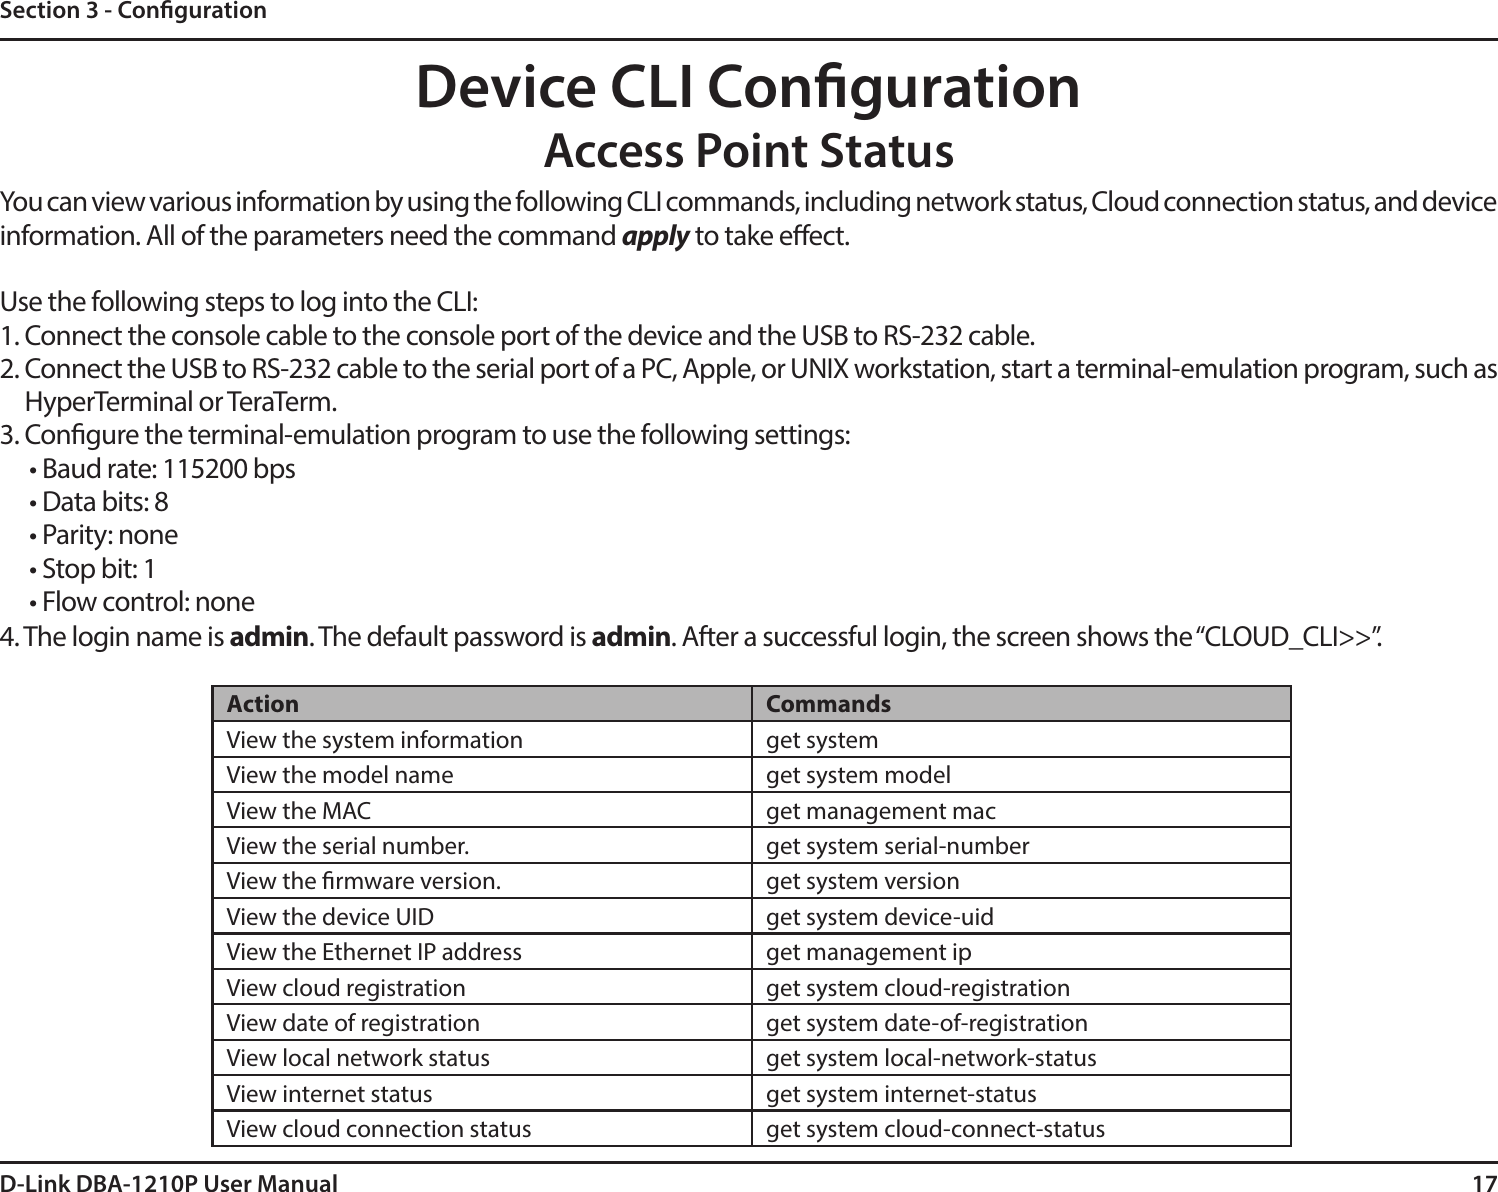 17D-Link DBA-1210P User ManualSection 3 - CongurationDevice CLI CongurationAccess Point StatusYou can view various information by using the following CLI commands, including network status, Cloud connection status, and device information. All of the parameters need the command apply to take eect. Use the following steps to log into the CLI:1. Connect the console cable to the console port of the device and the USB to RS-232 cable.2. Connect the USB to RS-232 cable to the serial port of a PC, Apple, or UNIX workstation, start a terminal-emulation program, such as HyperTerminal or TeraTerm.3. Congure the terminal-emulation program to use the following settings:• Baud rate: 115200 bps• Data bits: 8• Parity: none• Stop bit: 1• Flow control: none4. The login name is admin. The default password is admin. After a successful login, the screen shows the “CLOUD_CLI&gt;&gt;”.Action CommandsView the system information get systemView the model name get system modelView the MAC get management macView the serial number. get system serial-numberView the rmware version. get system versionView the device UID get system device-uidView the Ethernet IP address get management ipView cloud registration get system cloud-registrationView date of registration get system date-of-registrationView local network status get system local-network-statusView internet status get system internet-statusView cloud connection status get system cloud-connect-status